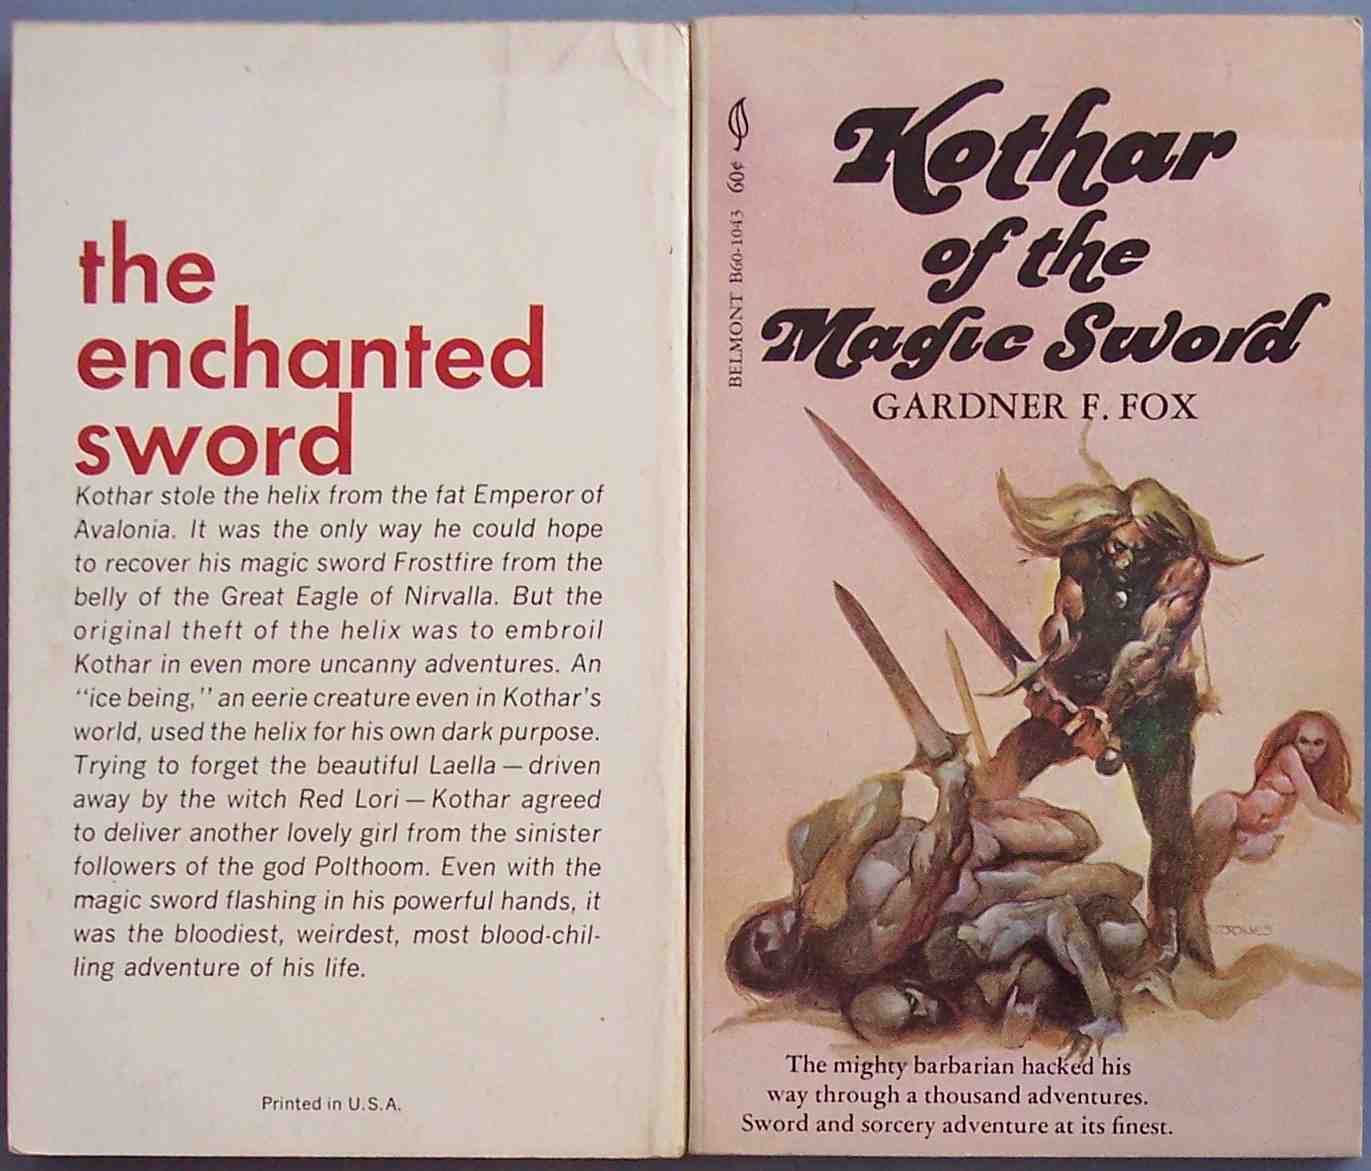 a book with an image of knights attacking each other